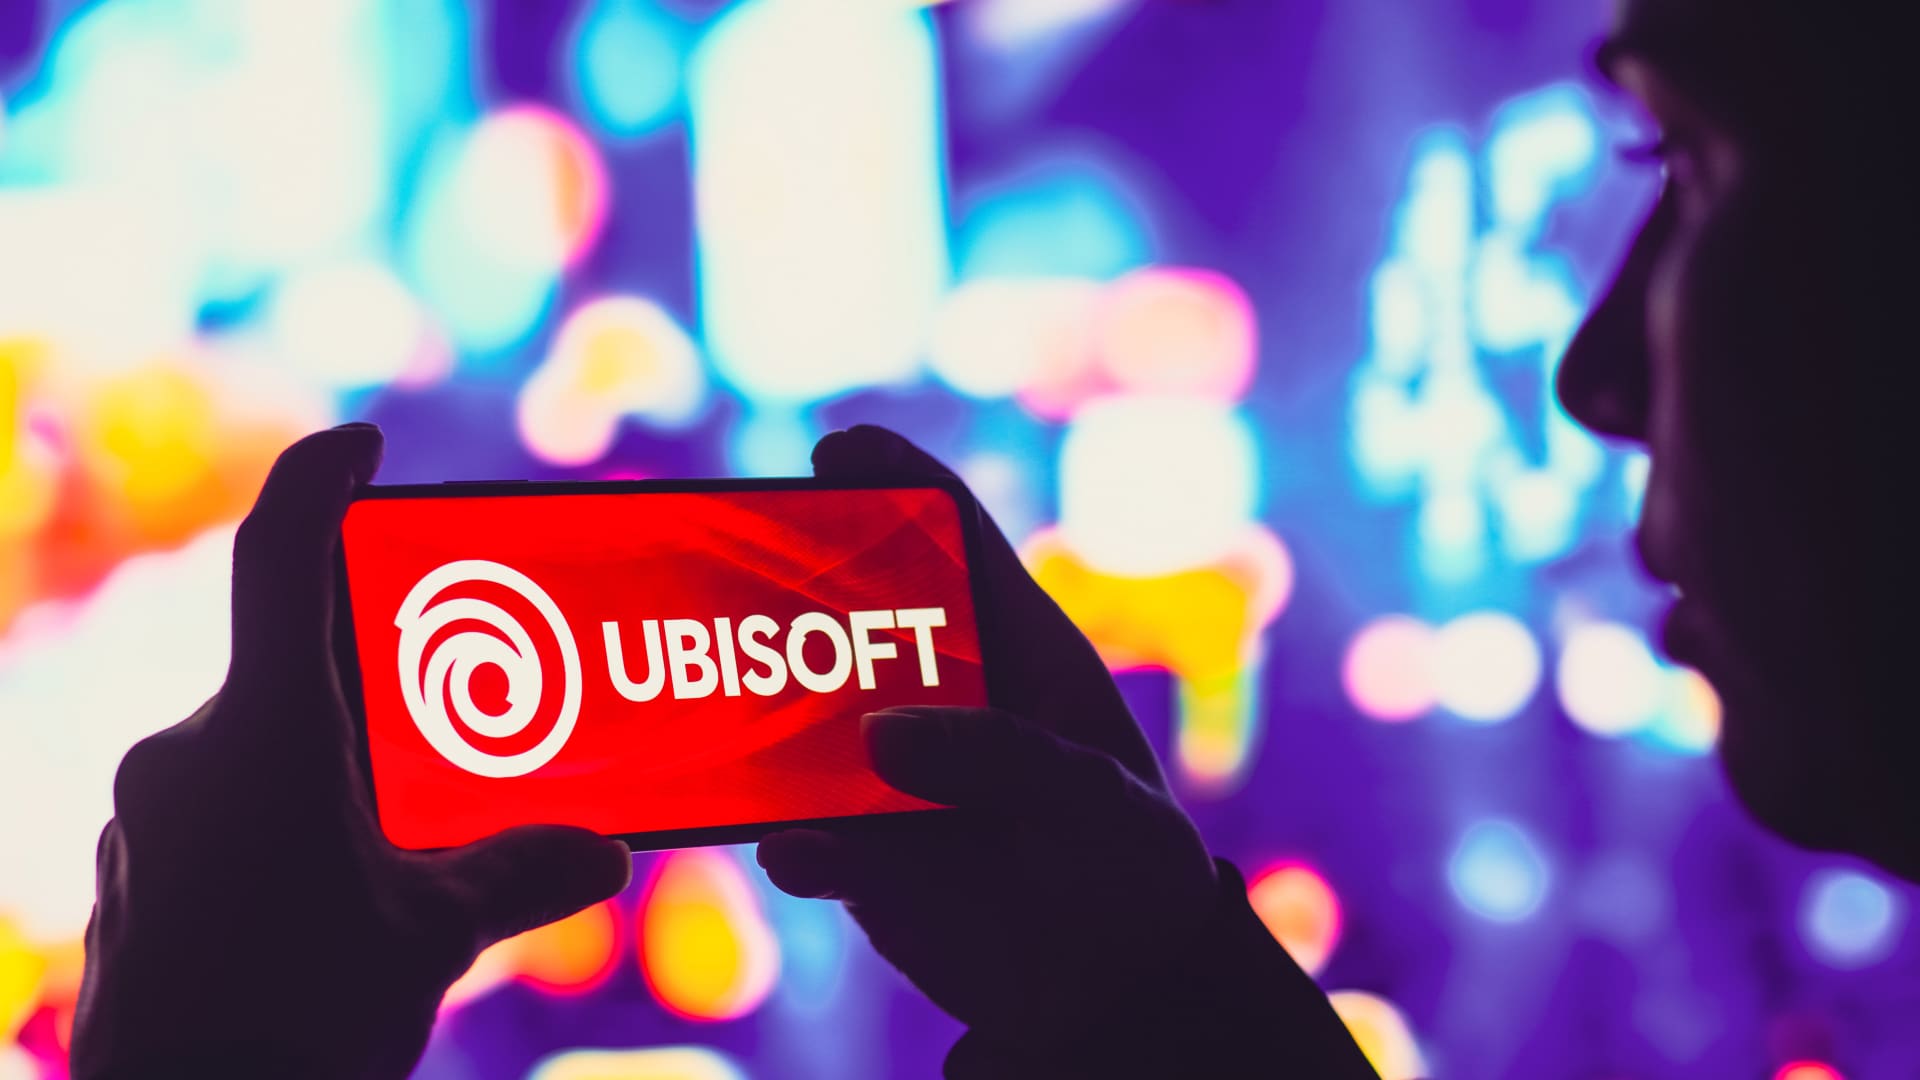 Ubisoft cancels three games, cuts targets, citing worsening conditions